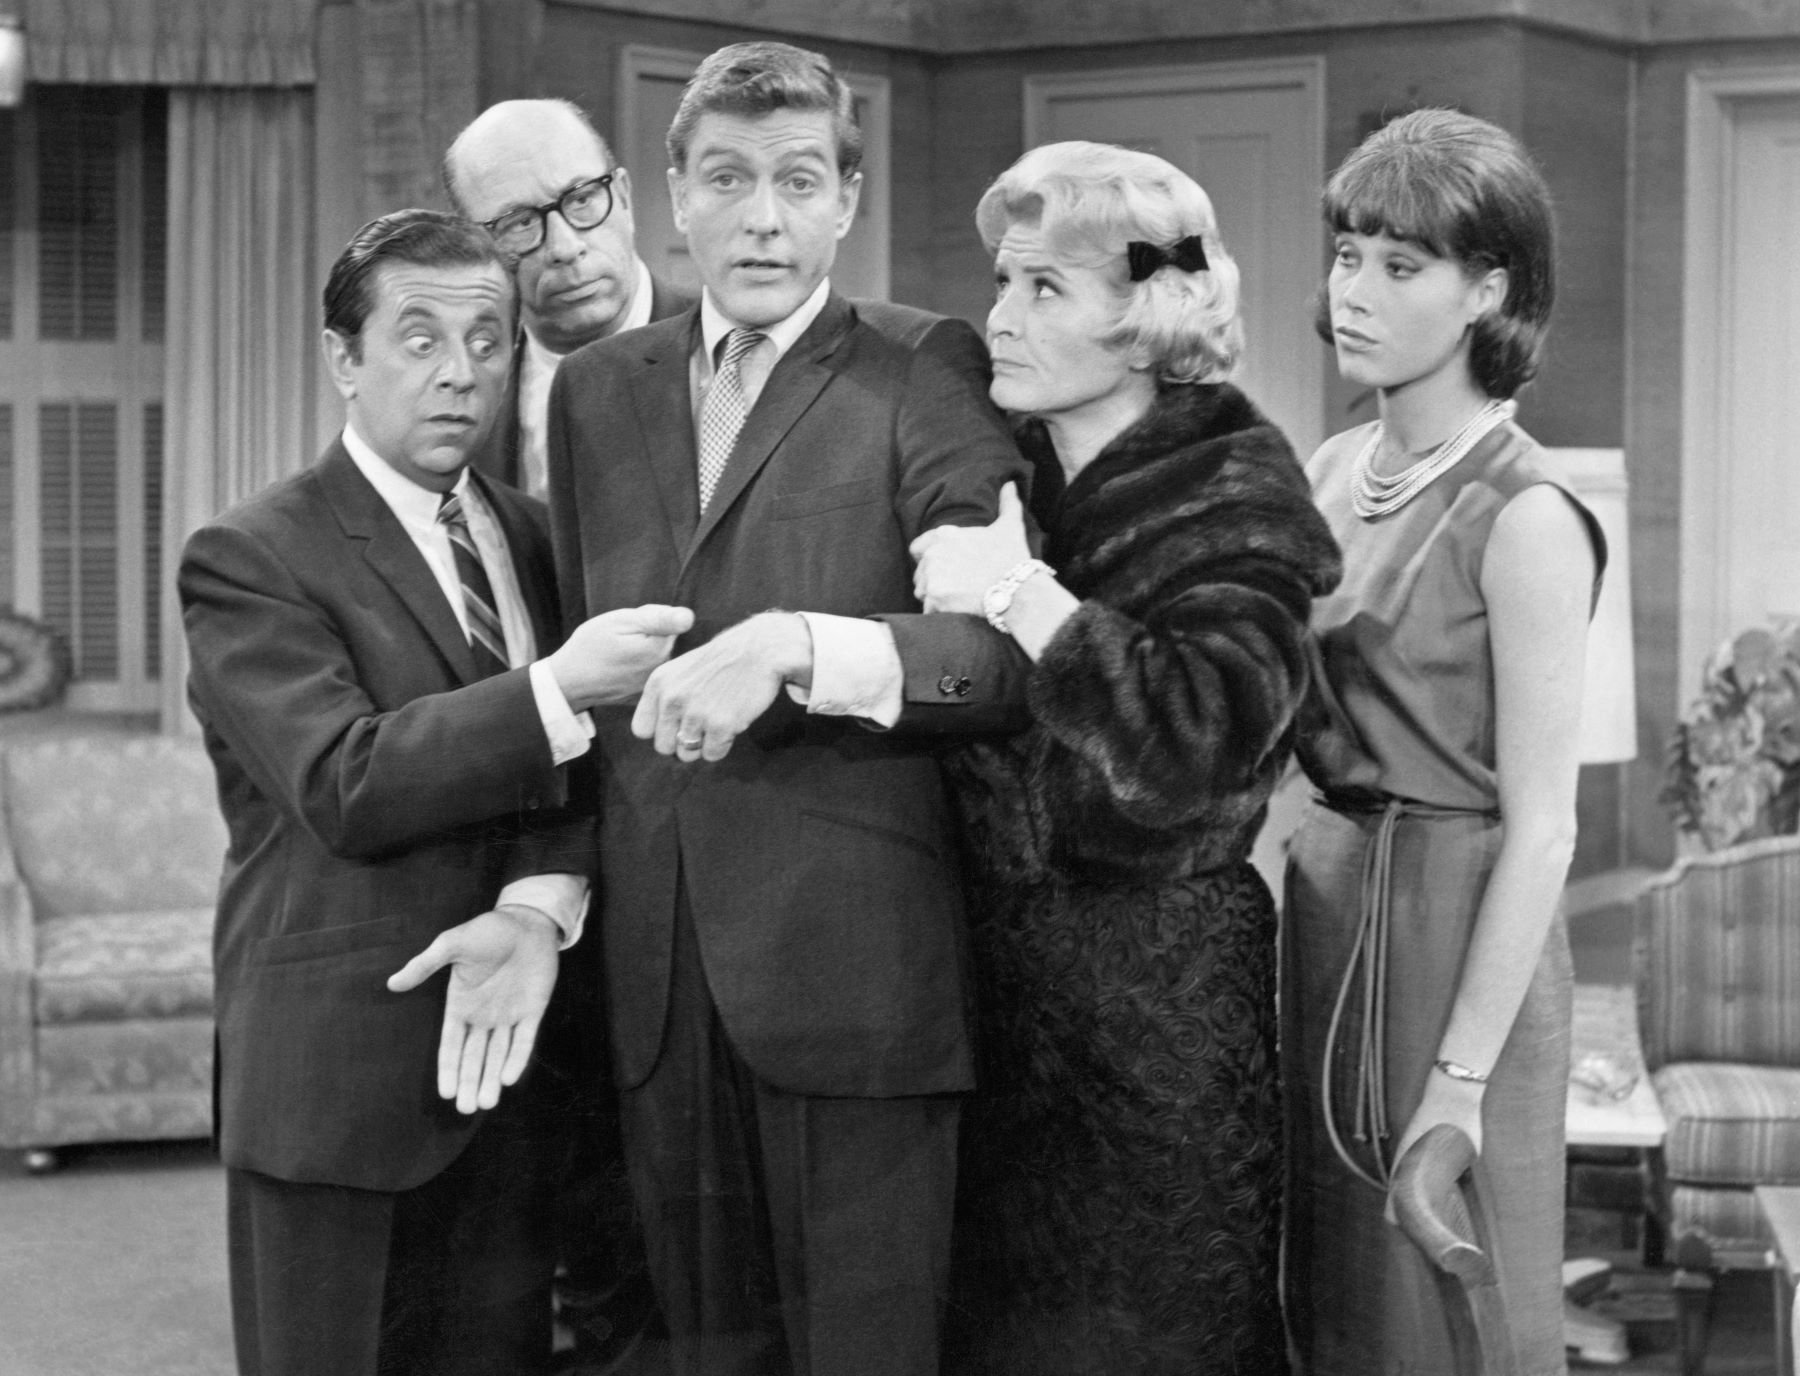 The cast of 'The Dick Van Dyke Show' in 1965